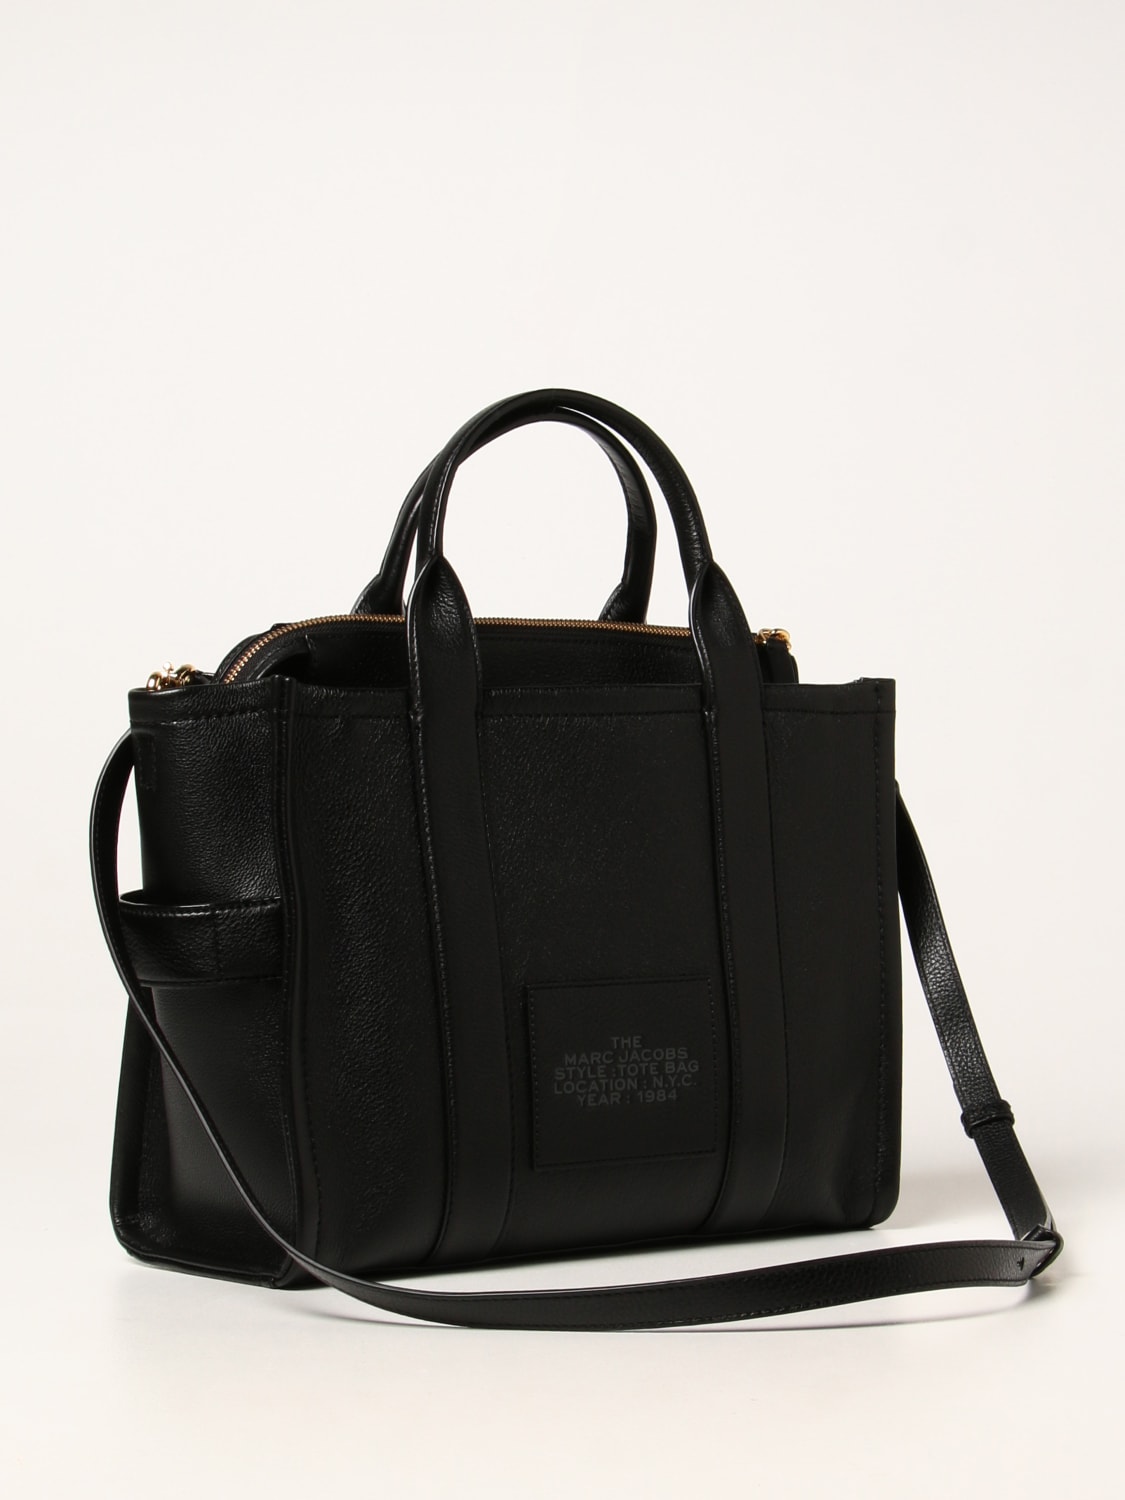 MARC JACOBS: The Tote Bag in leather - Black